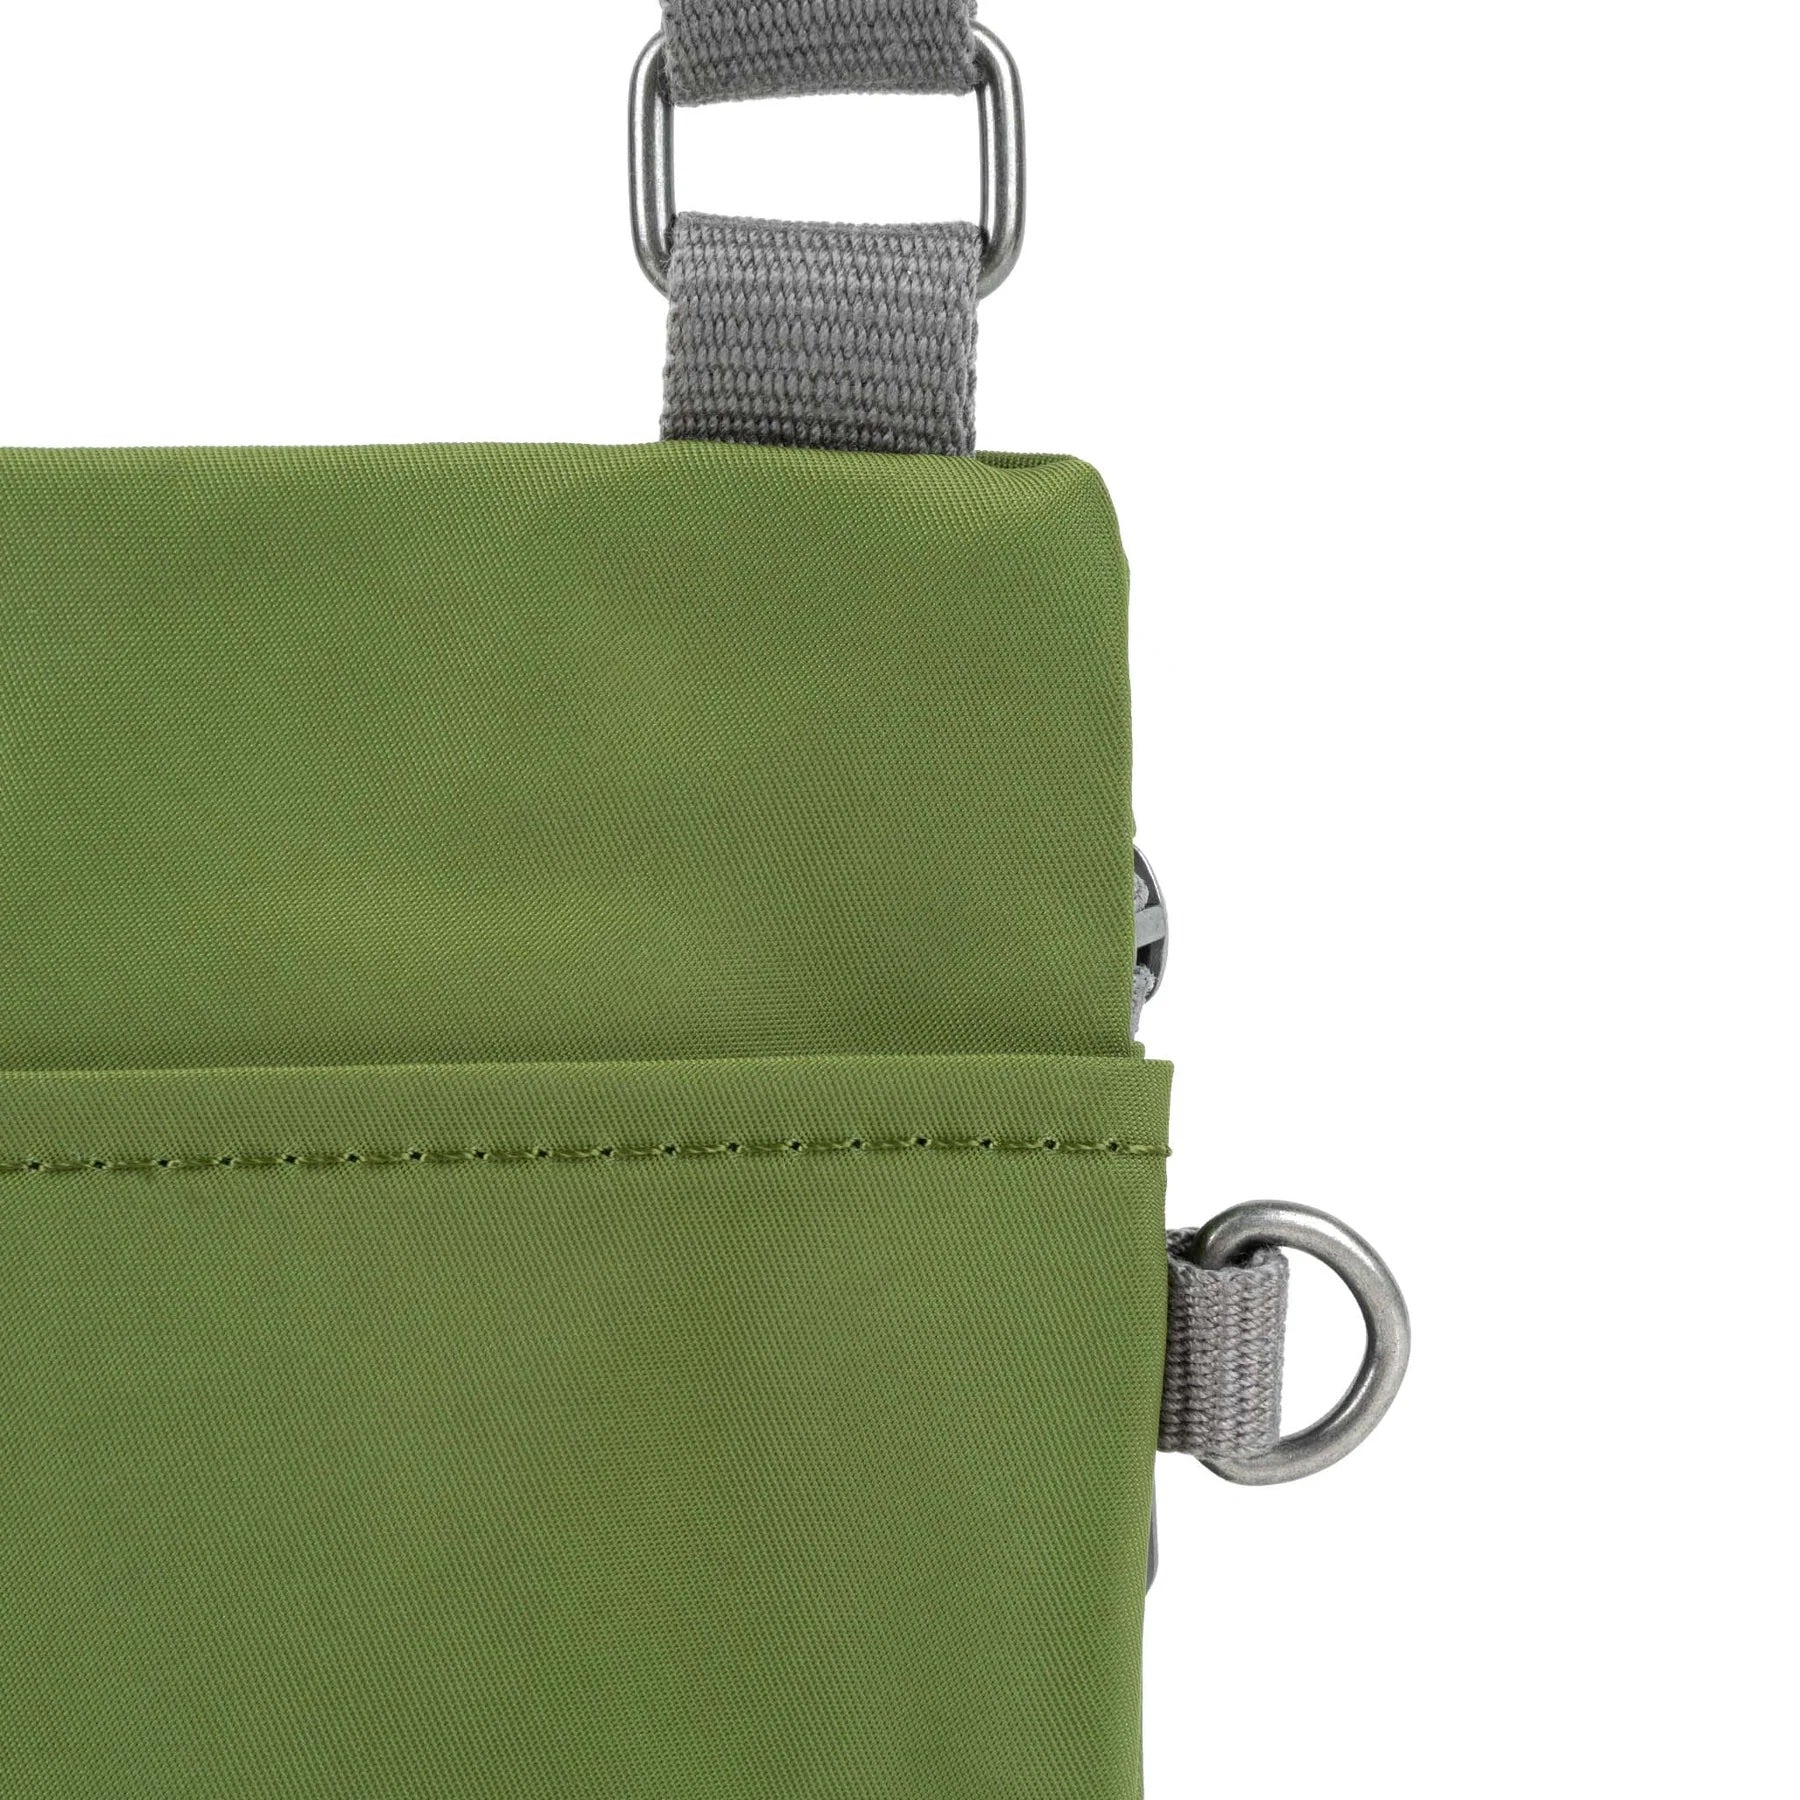 A close up photo of the back of a avocado green bag, showing the grey strap and neatly stitched pocket opening.